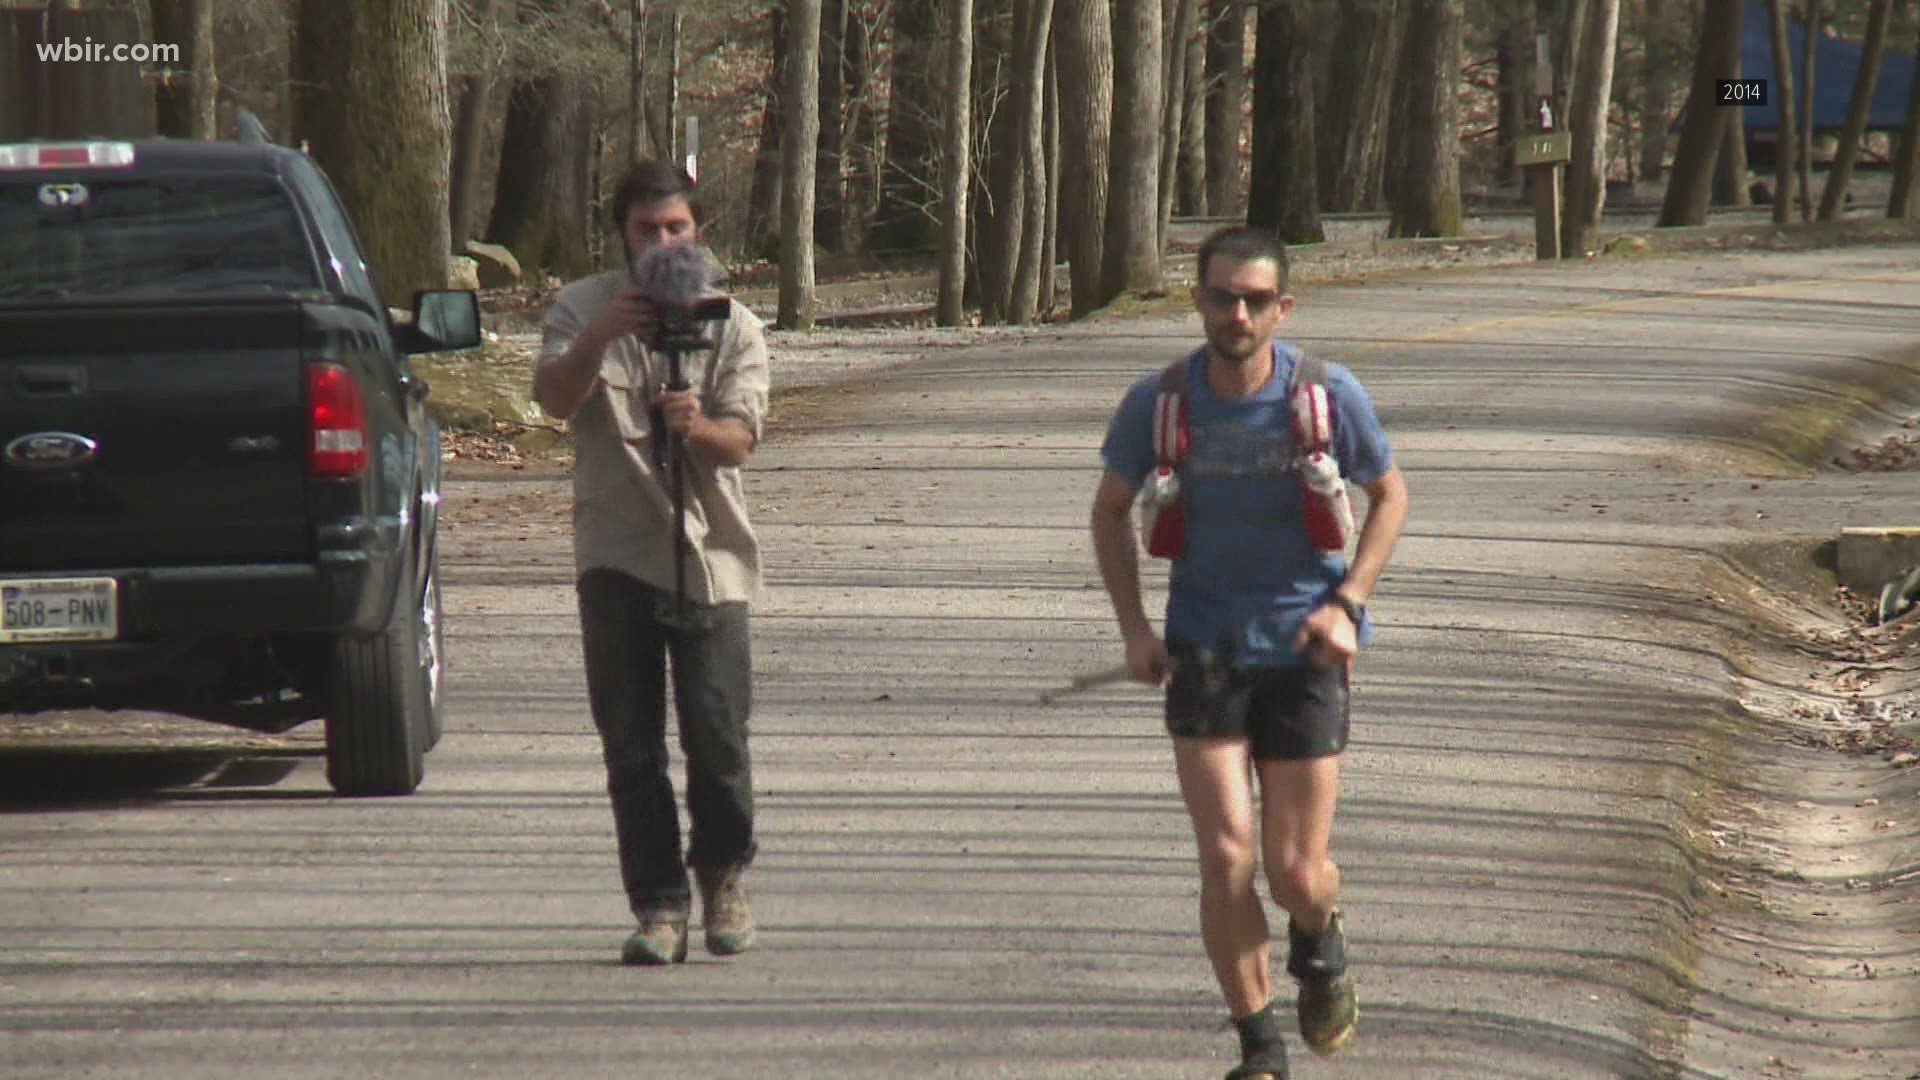 No athlete finished the 2021 Barkley Marathons. Only 15 people finished the event in the last 34 years.